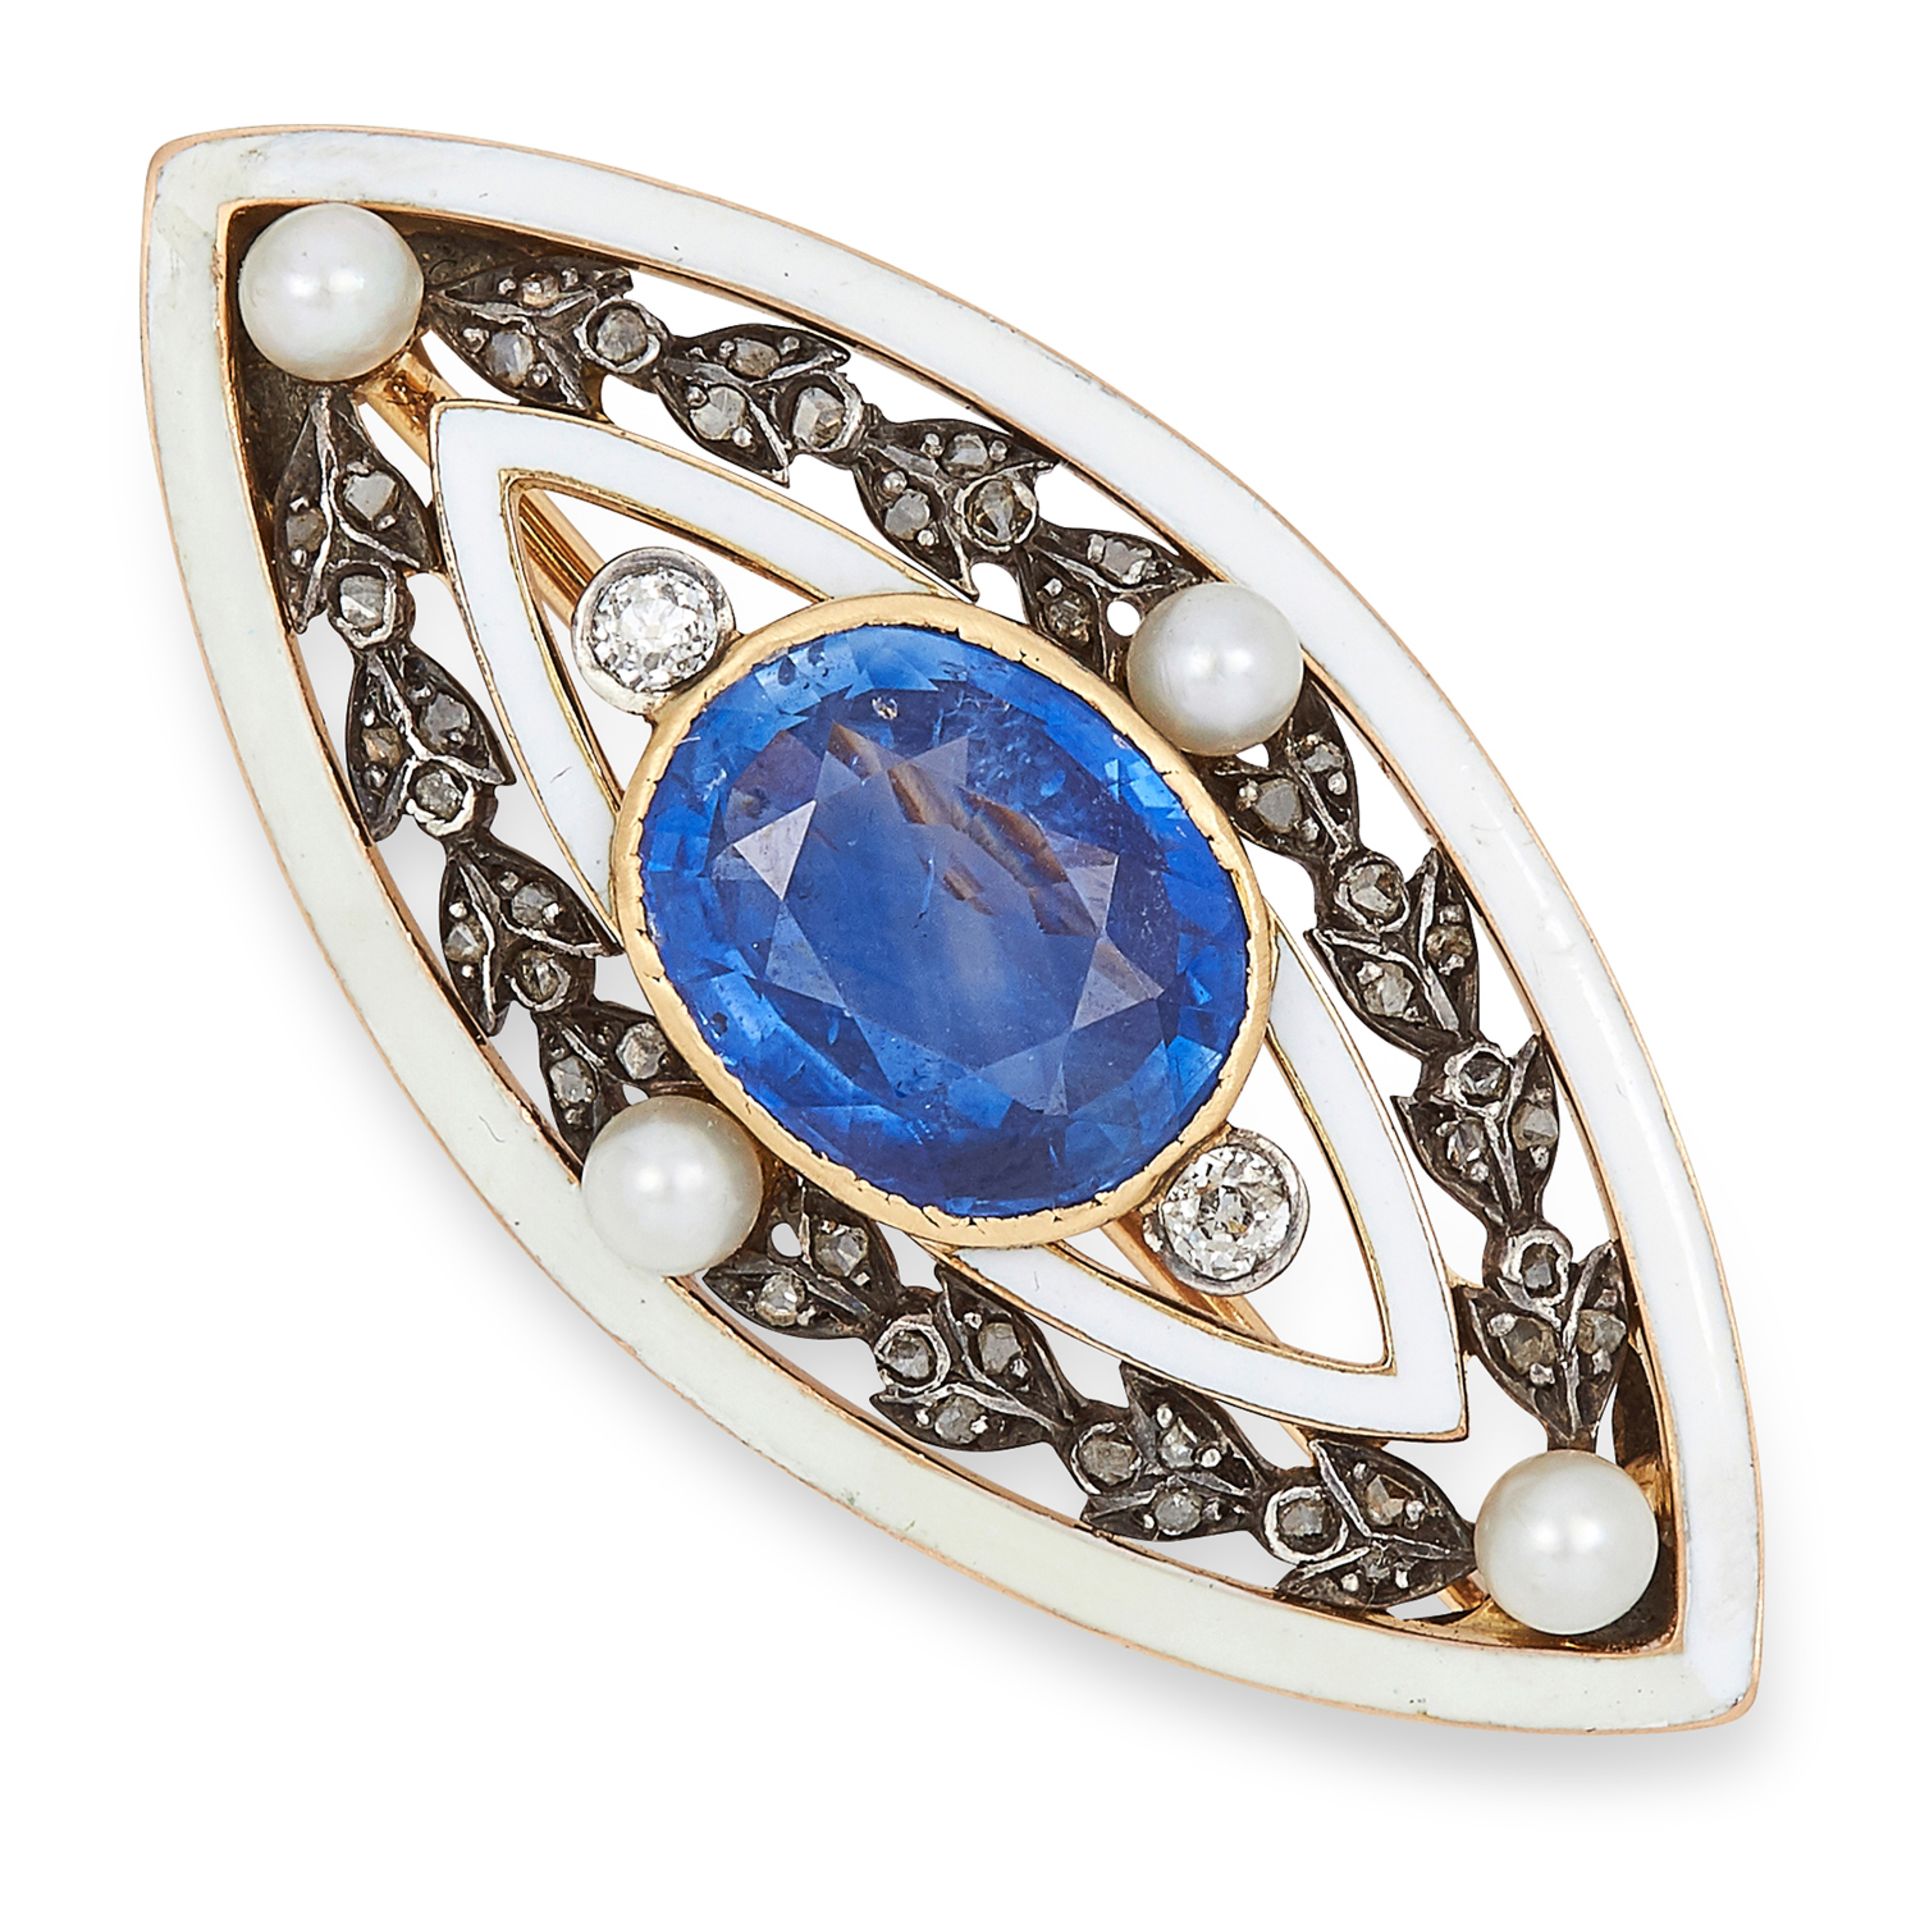 ANTIQUE SAPPHIRE, PEARL, DIAMOND AND ENAMEL BROOCH set with a cushion cut sapphire of